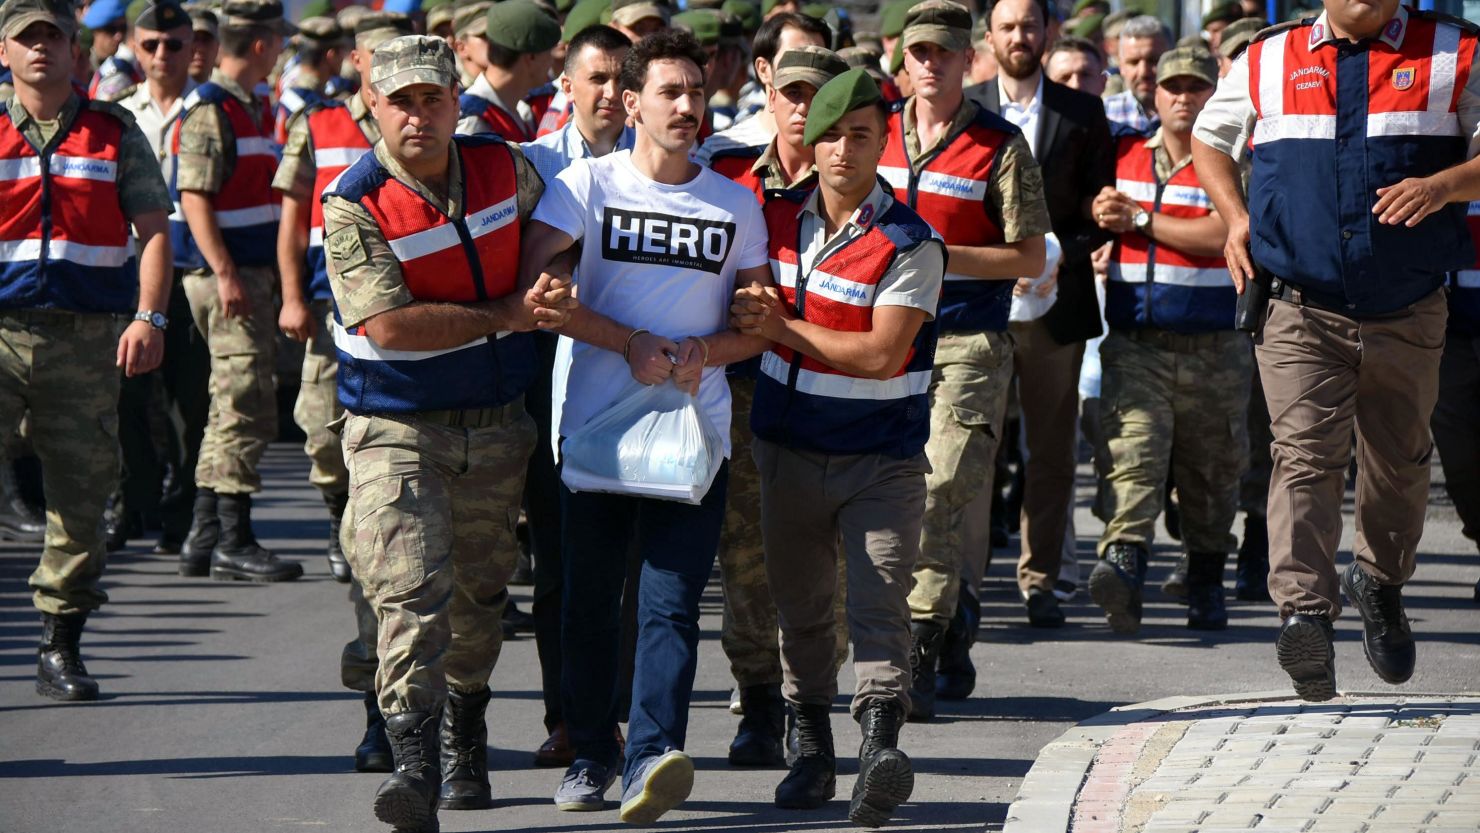 Gokhan Guclu wore the "HERO" T-shirt to his court hearing on July 13. 